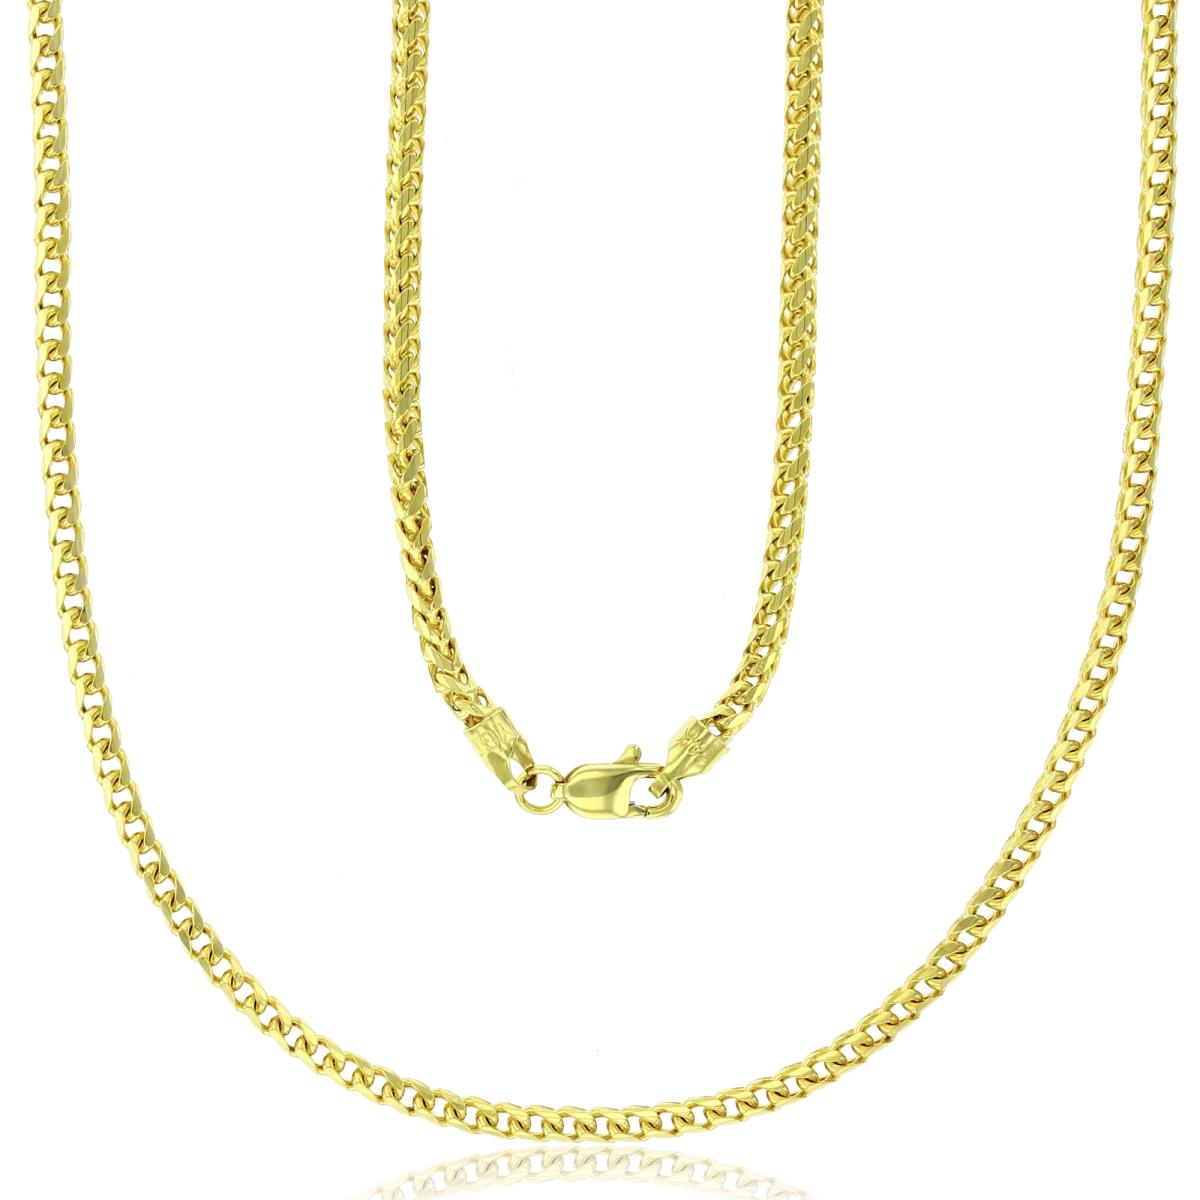 14K Yellow Gold 2.75mm 24" Solid Franco 080 Chain